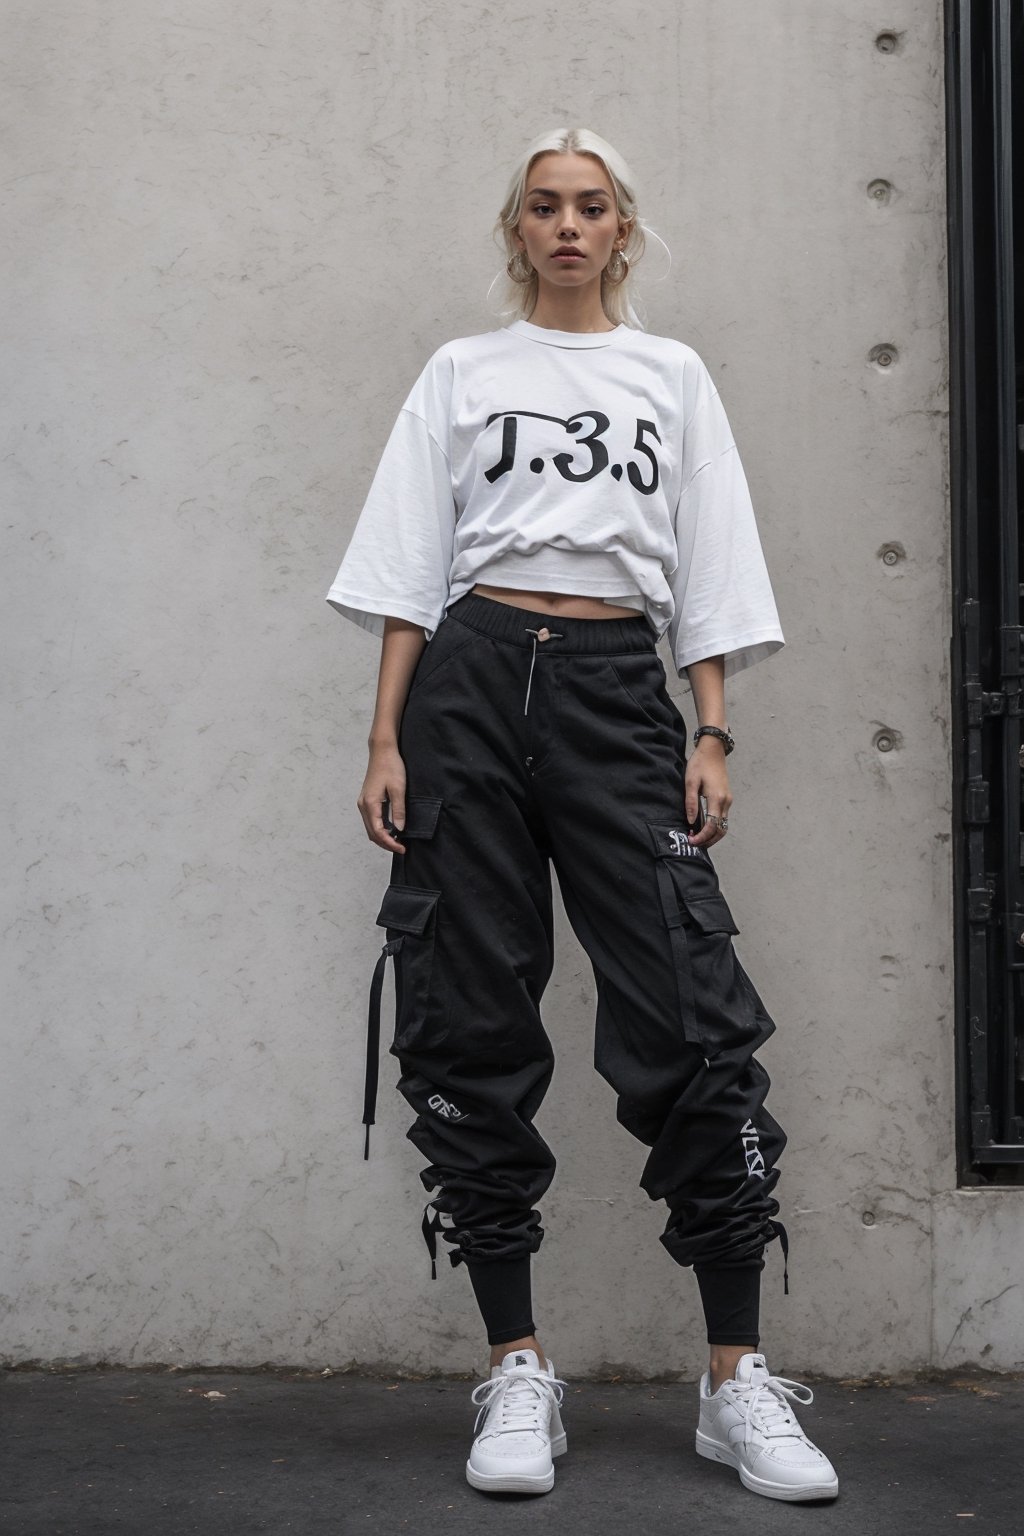 1girl, young pretty white girl, hot top model, long blonde hair, wearing a white oversize t shirt (t shirt only white color) and Acronym J36-S black pants and Acronym P30A-DS and black and white sneakers, piercings, in city, sitting near a wall, instagram model, 80mm,urban techwear,weapon